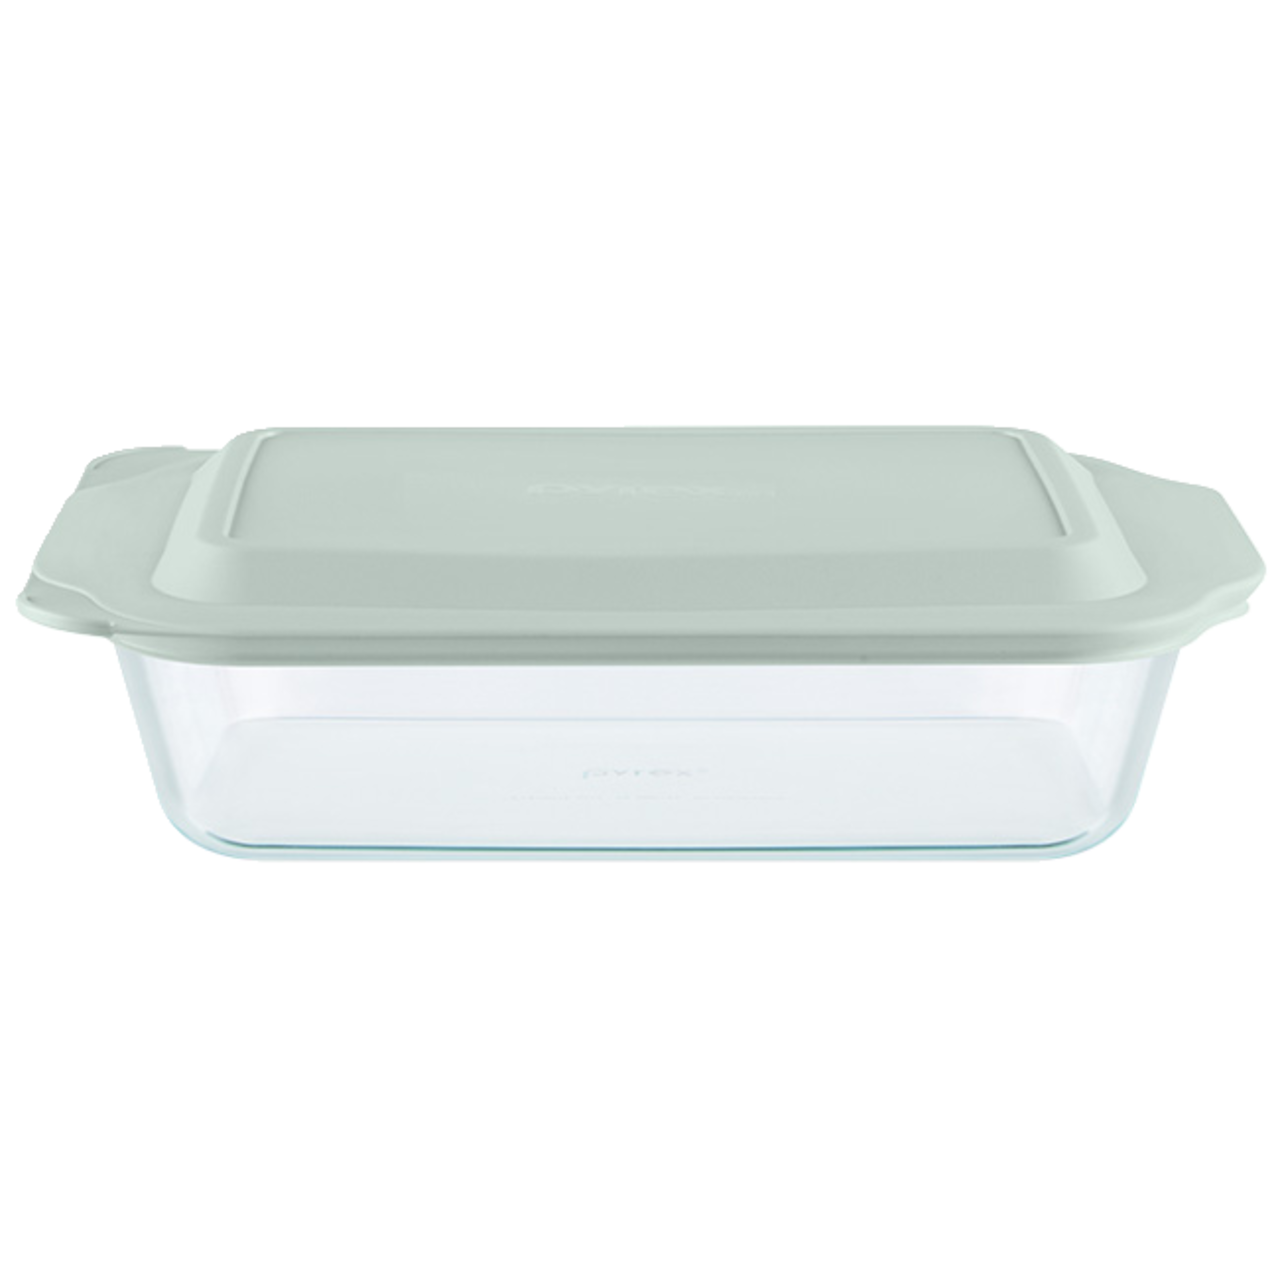 https://media-www.canadiantire.ca/product/living/kitchen/bakeware-baking-prep/1429693/pyrex-deep-9x13-baker-b2d8fc99-5c0b-4fc8-8e39-1e3272842bea.png?imdensity=1&imwidth=1244&impolicy=mZoom